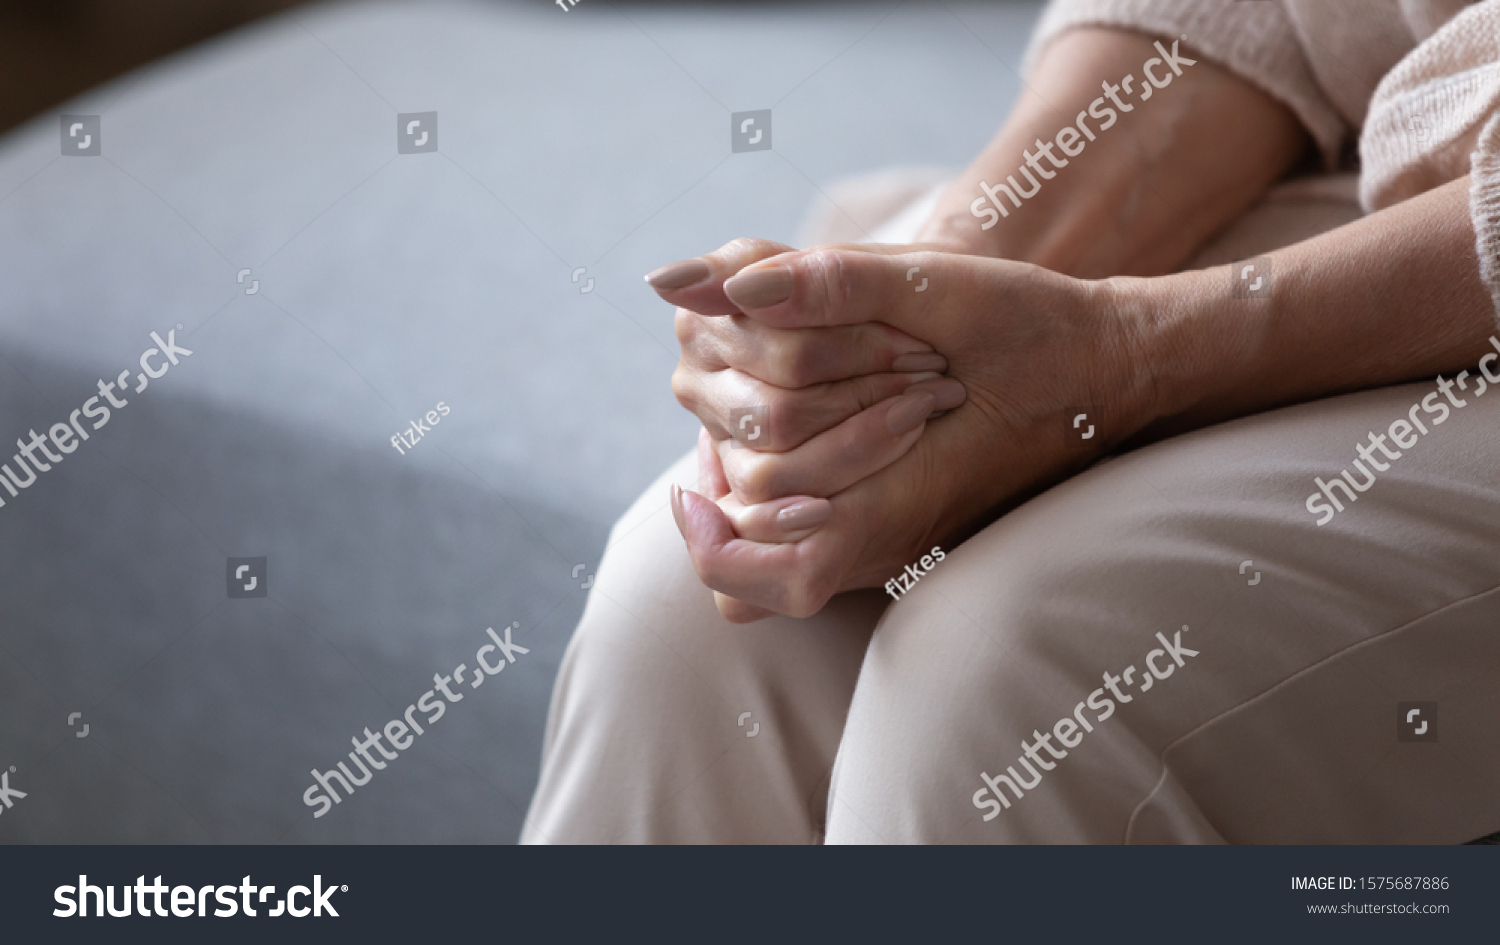 Elderly woman seated on couch holding hands together folded on lap feeling lonely and abandoned close up image. Solitude or loneliness, person recollect memories, waiting, life in nursing home concept #1575687886